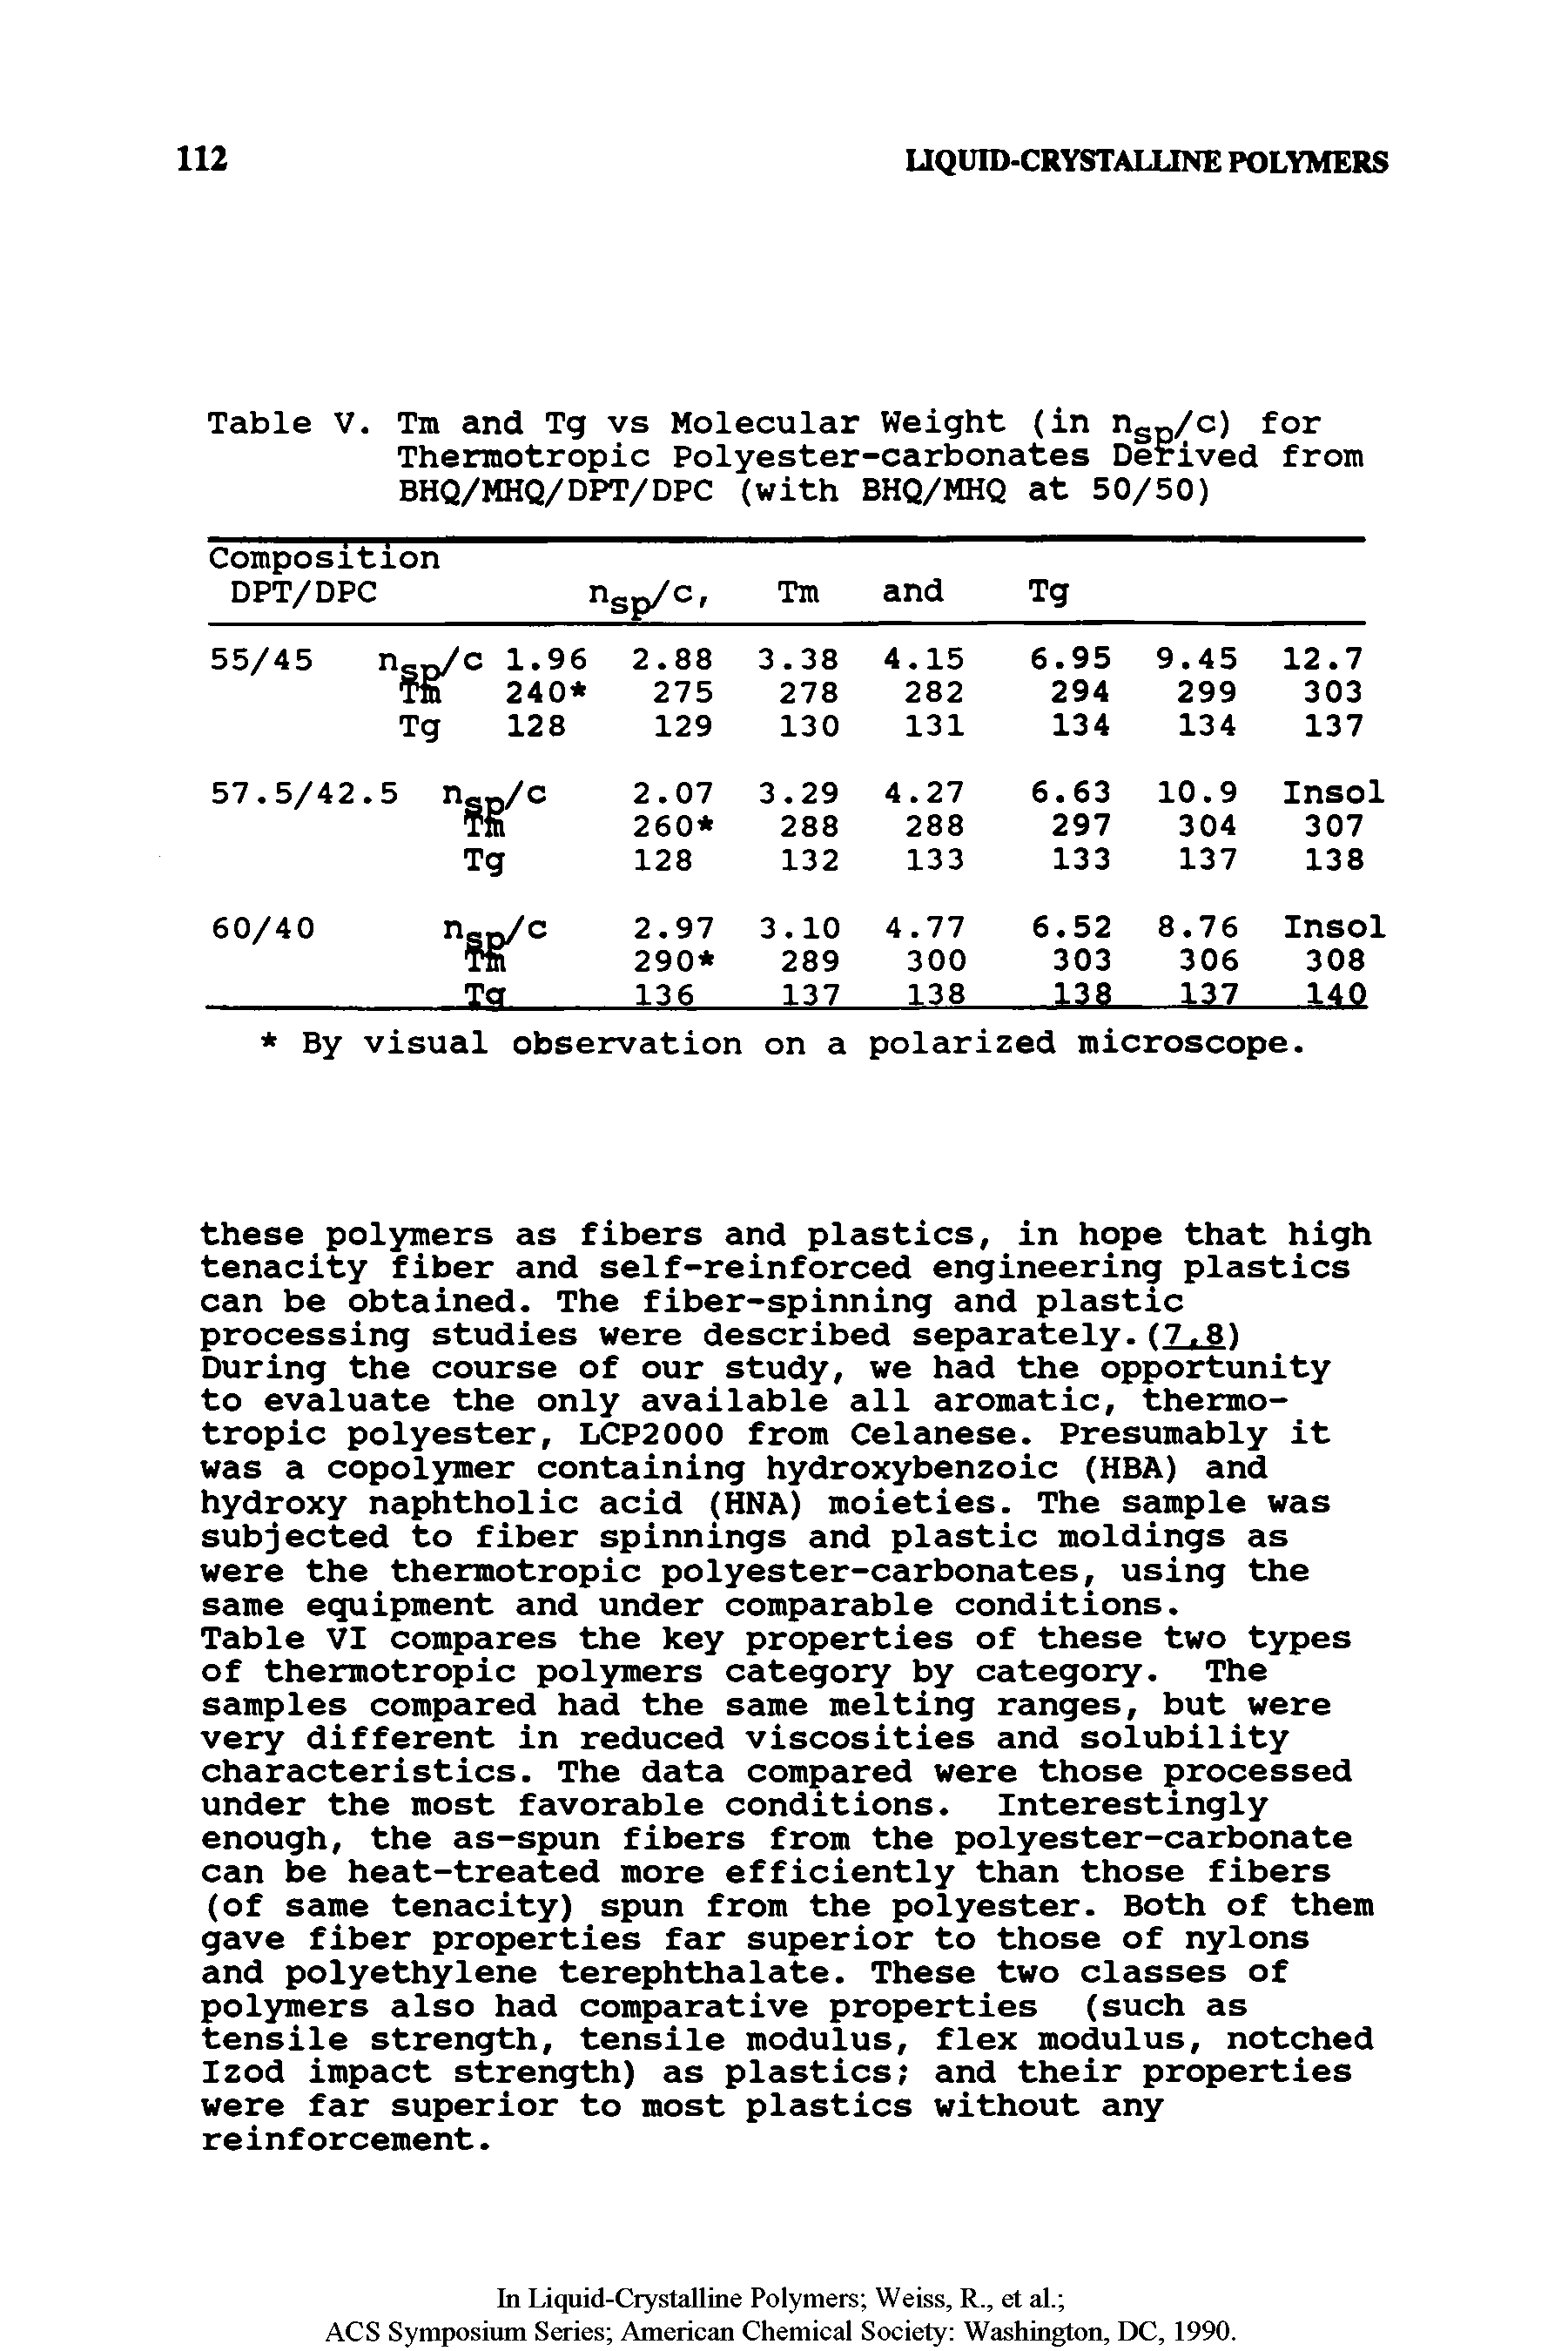 Table VI compares the key properties of these two types of thermotropic polymers category by category. The samples compared had the same melting ranges, but were very different in reduced viscosities and solubility characteristics. The data compared were those processed under the most favorable conditions. Interestingly enough, the as-spun fibers from the polyester-carbonate can be heat-treated more efficiently than those fibers (of same tenacity) spun from the polyester. Both of them gave fiber properties far superior to those of nylons and polyethylene terephthalate. These two classes of polymers also had comparative properties (such as tensile strength, tensile modulus, flex modulus, notched Izod impact strength) as plastics and their properties were far superior to most plastics without any reinforcement.